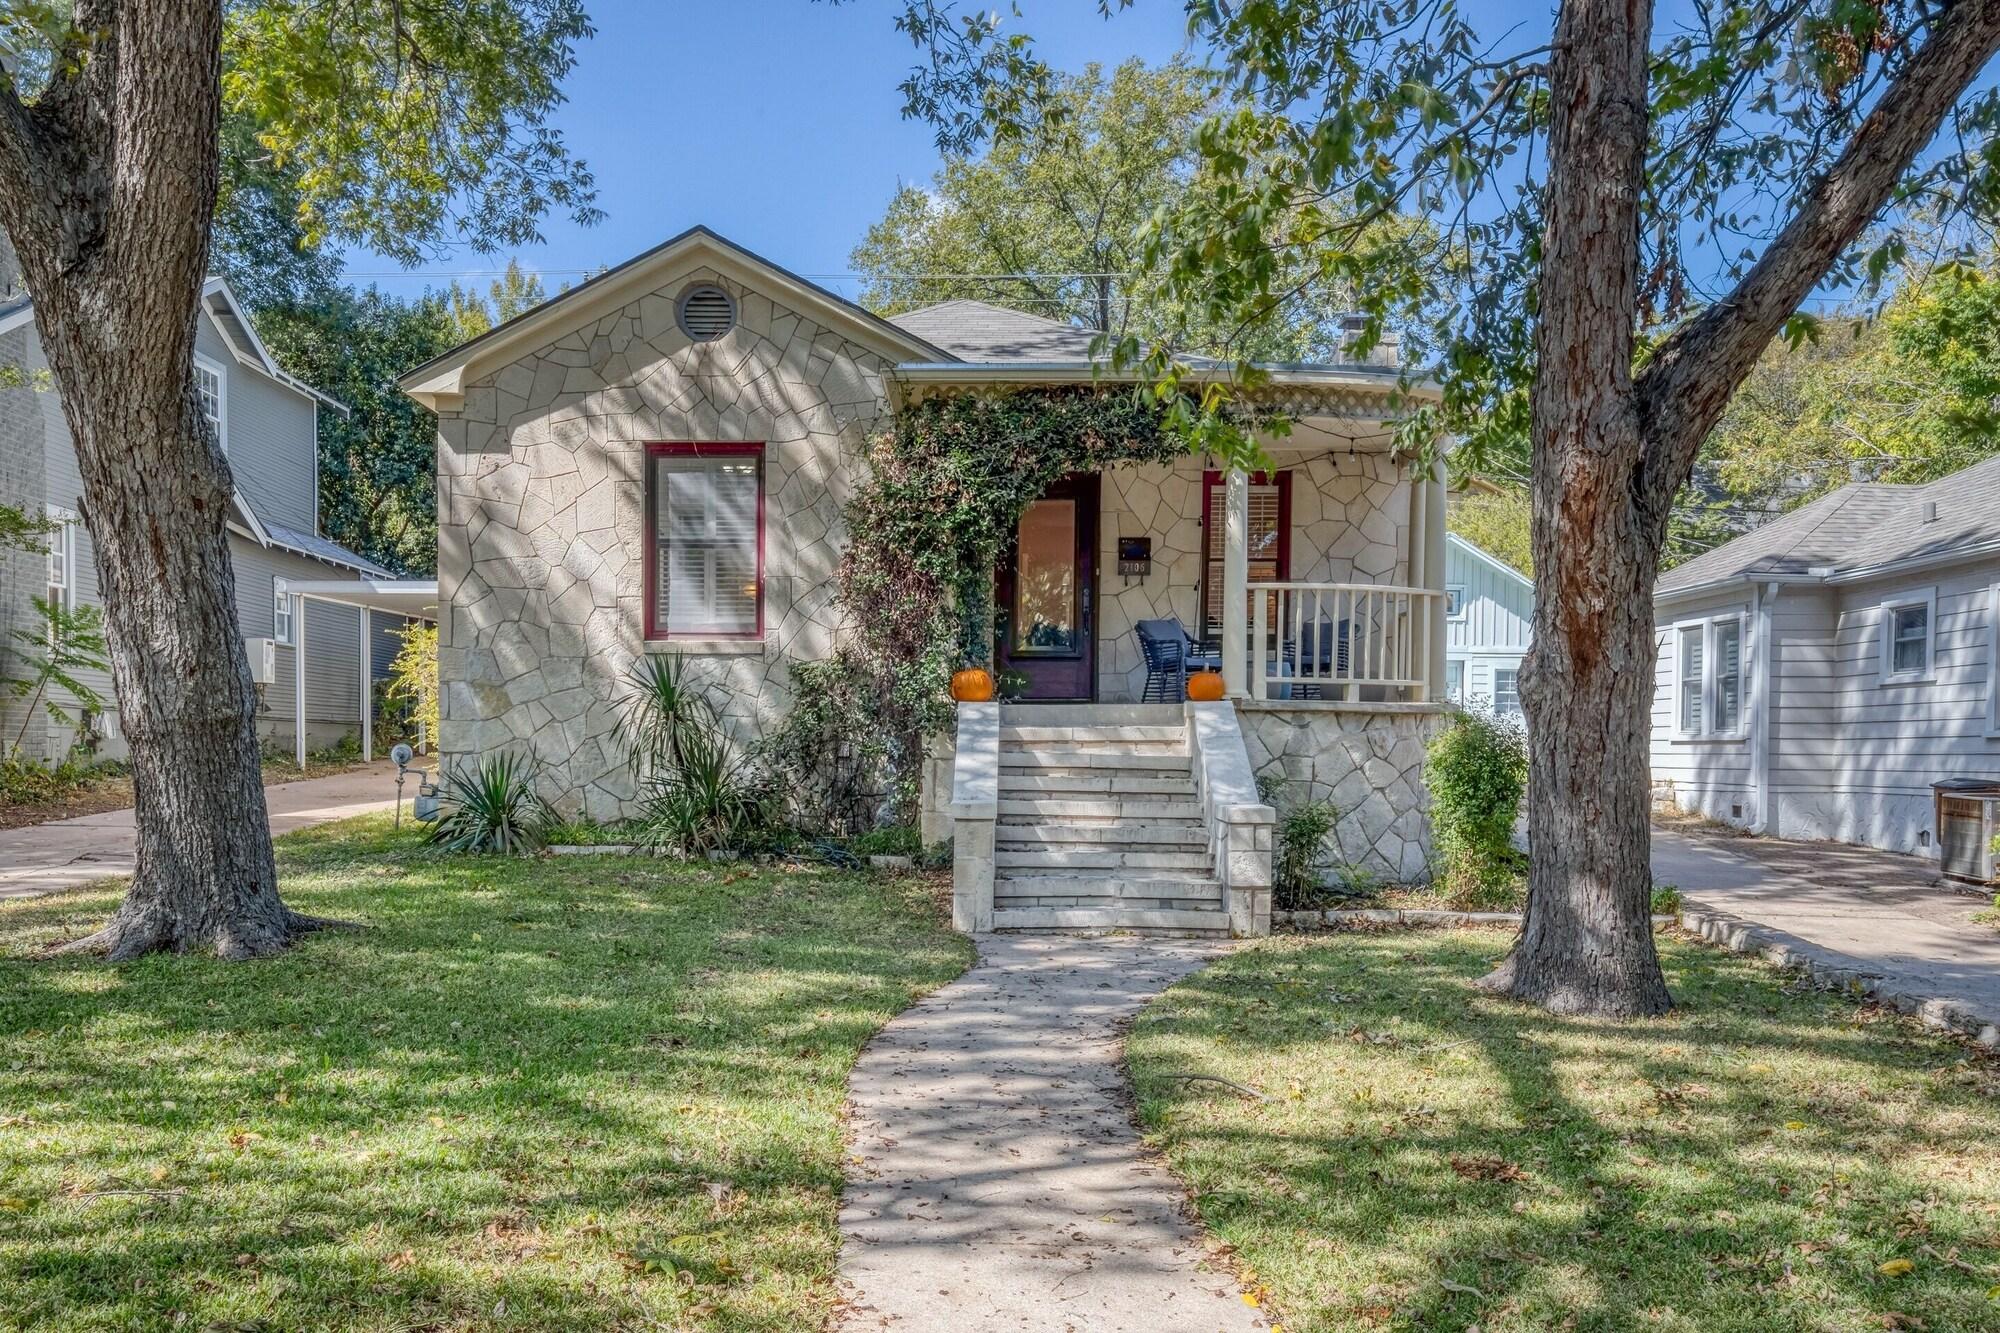 Miscellaneous Charmer Close To Dt Austin- Large 4bd/3ba + Hottub 4 Bedroom Home